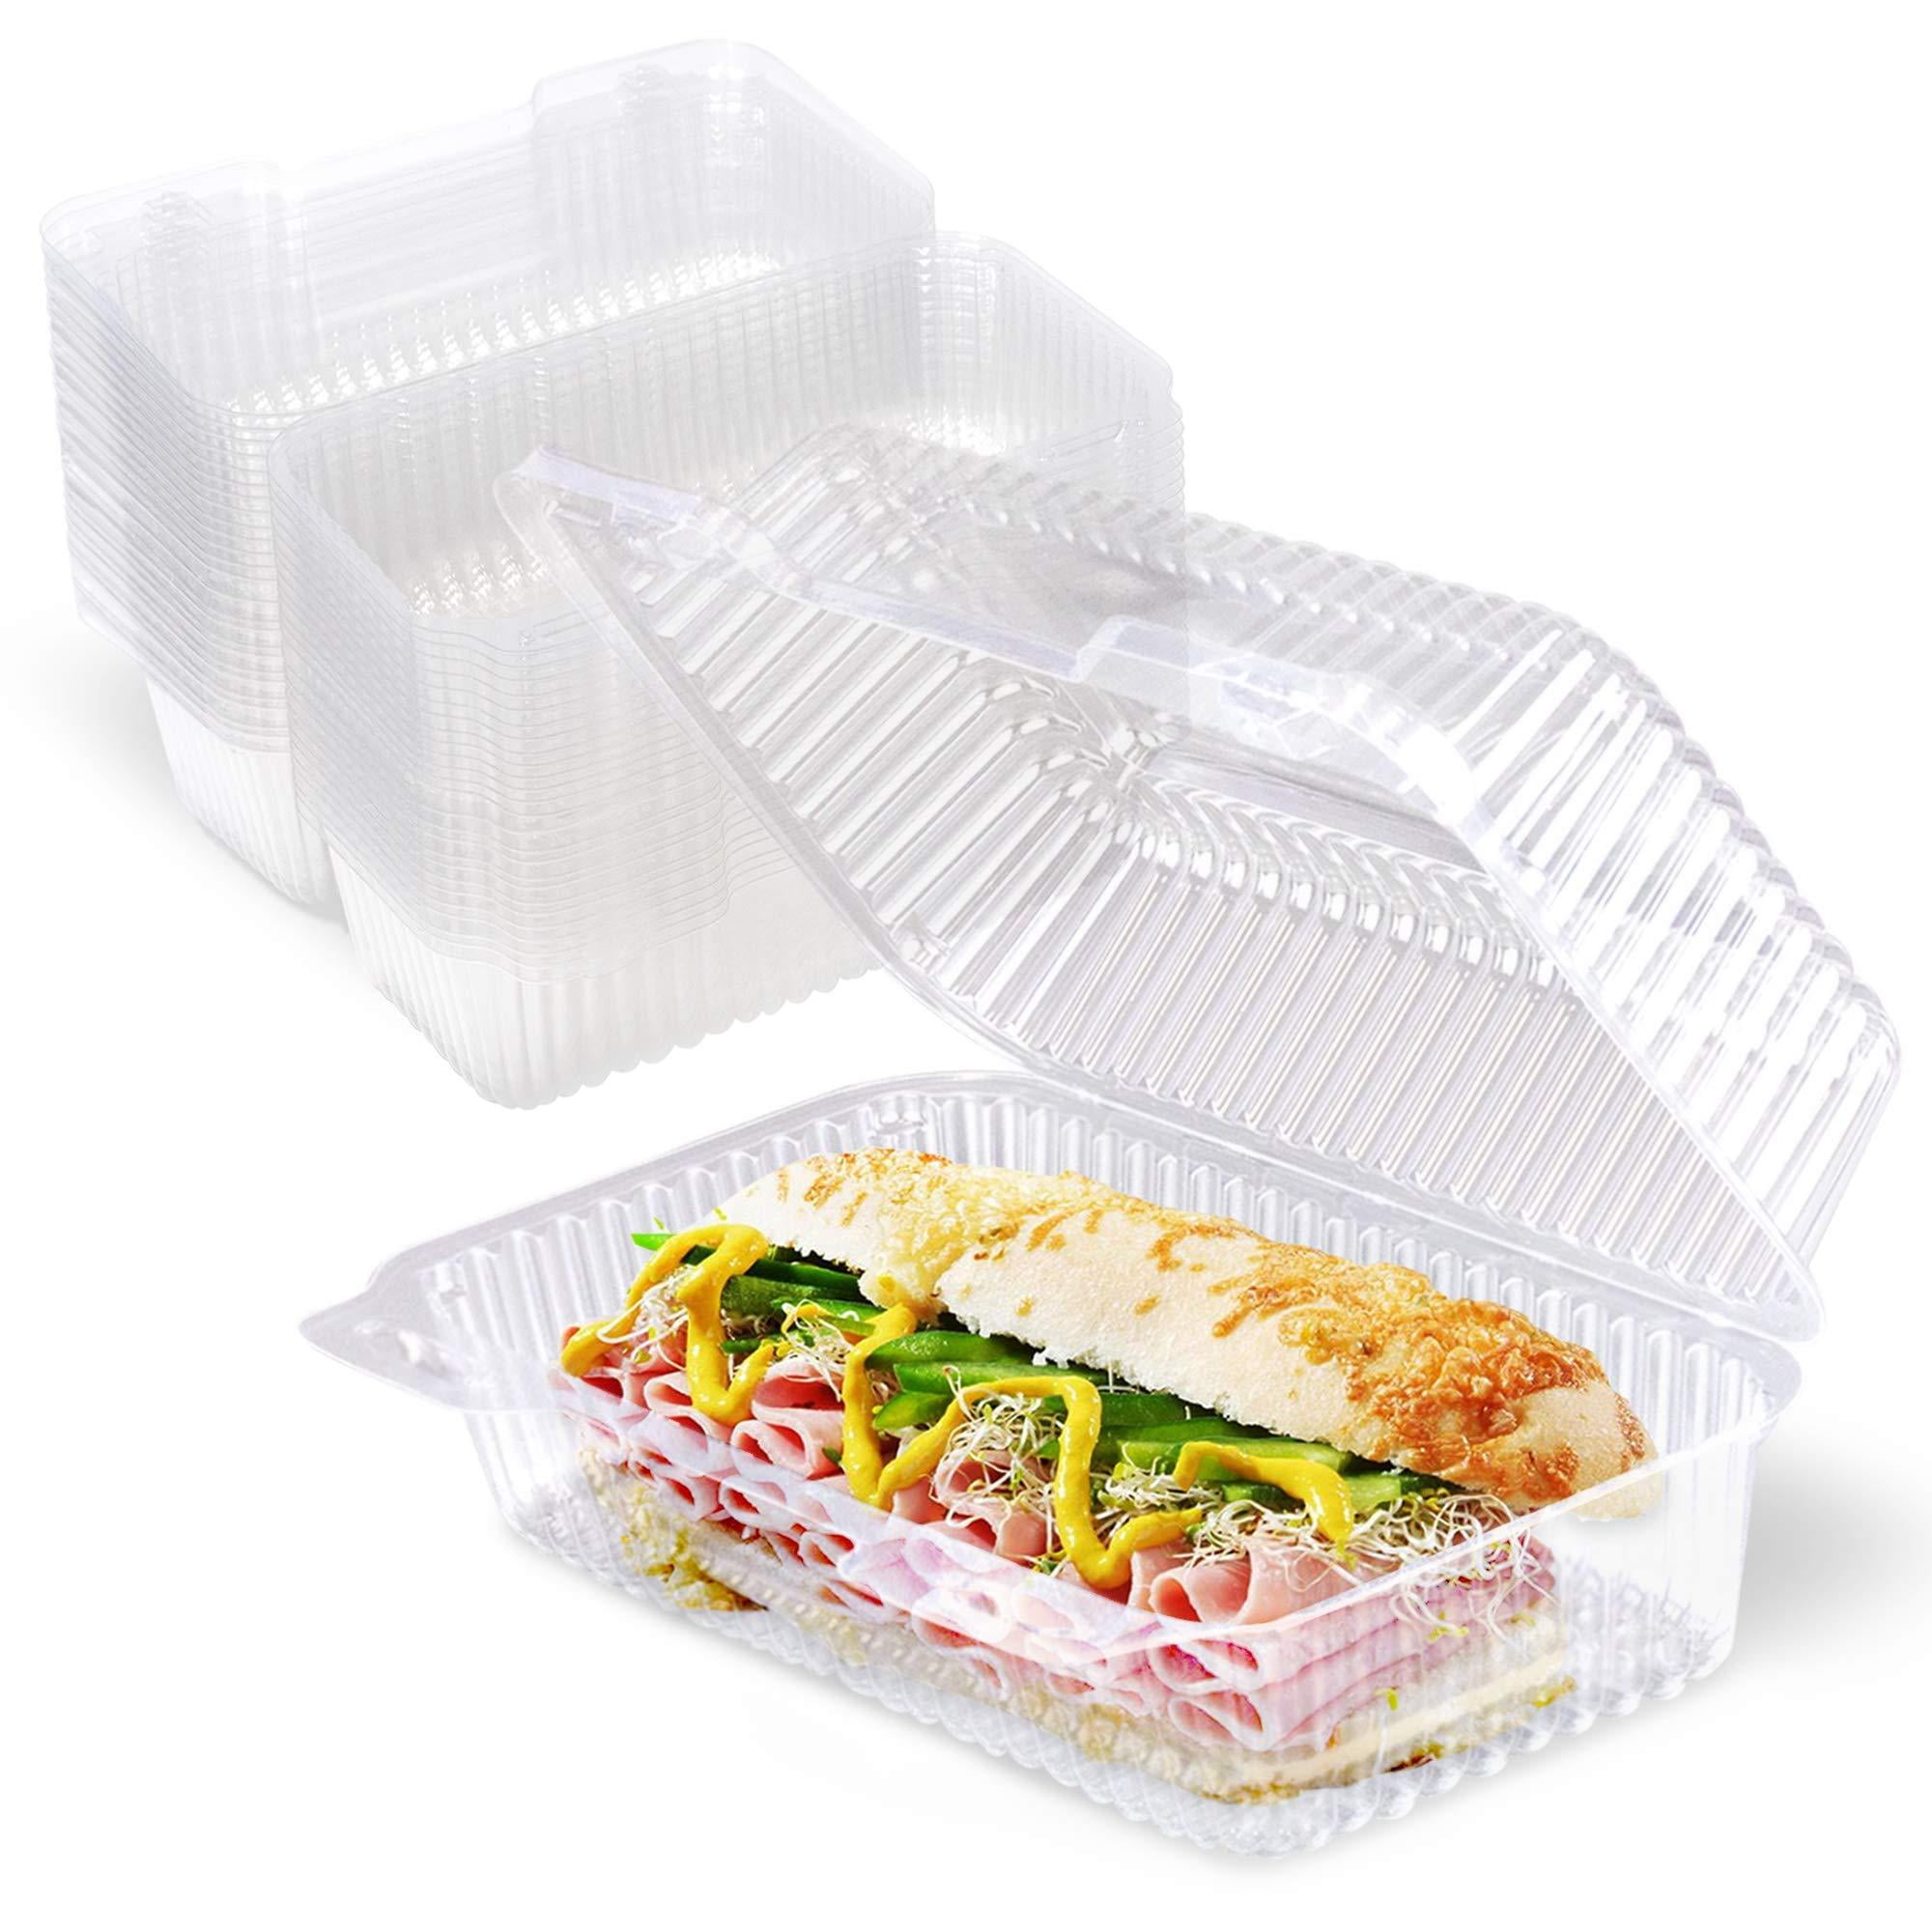 Thermo Tek 41 oz Rectangle Clear Plastic Clamshell Container - 3-Compartment, Anti-Fog - 9 inch x 8 1/4 inch x 2 1/2 inch - 100 Count Box